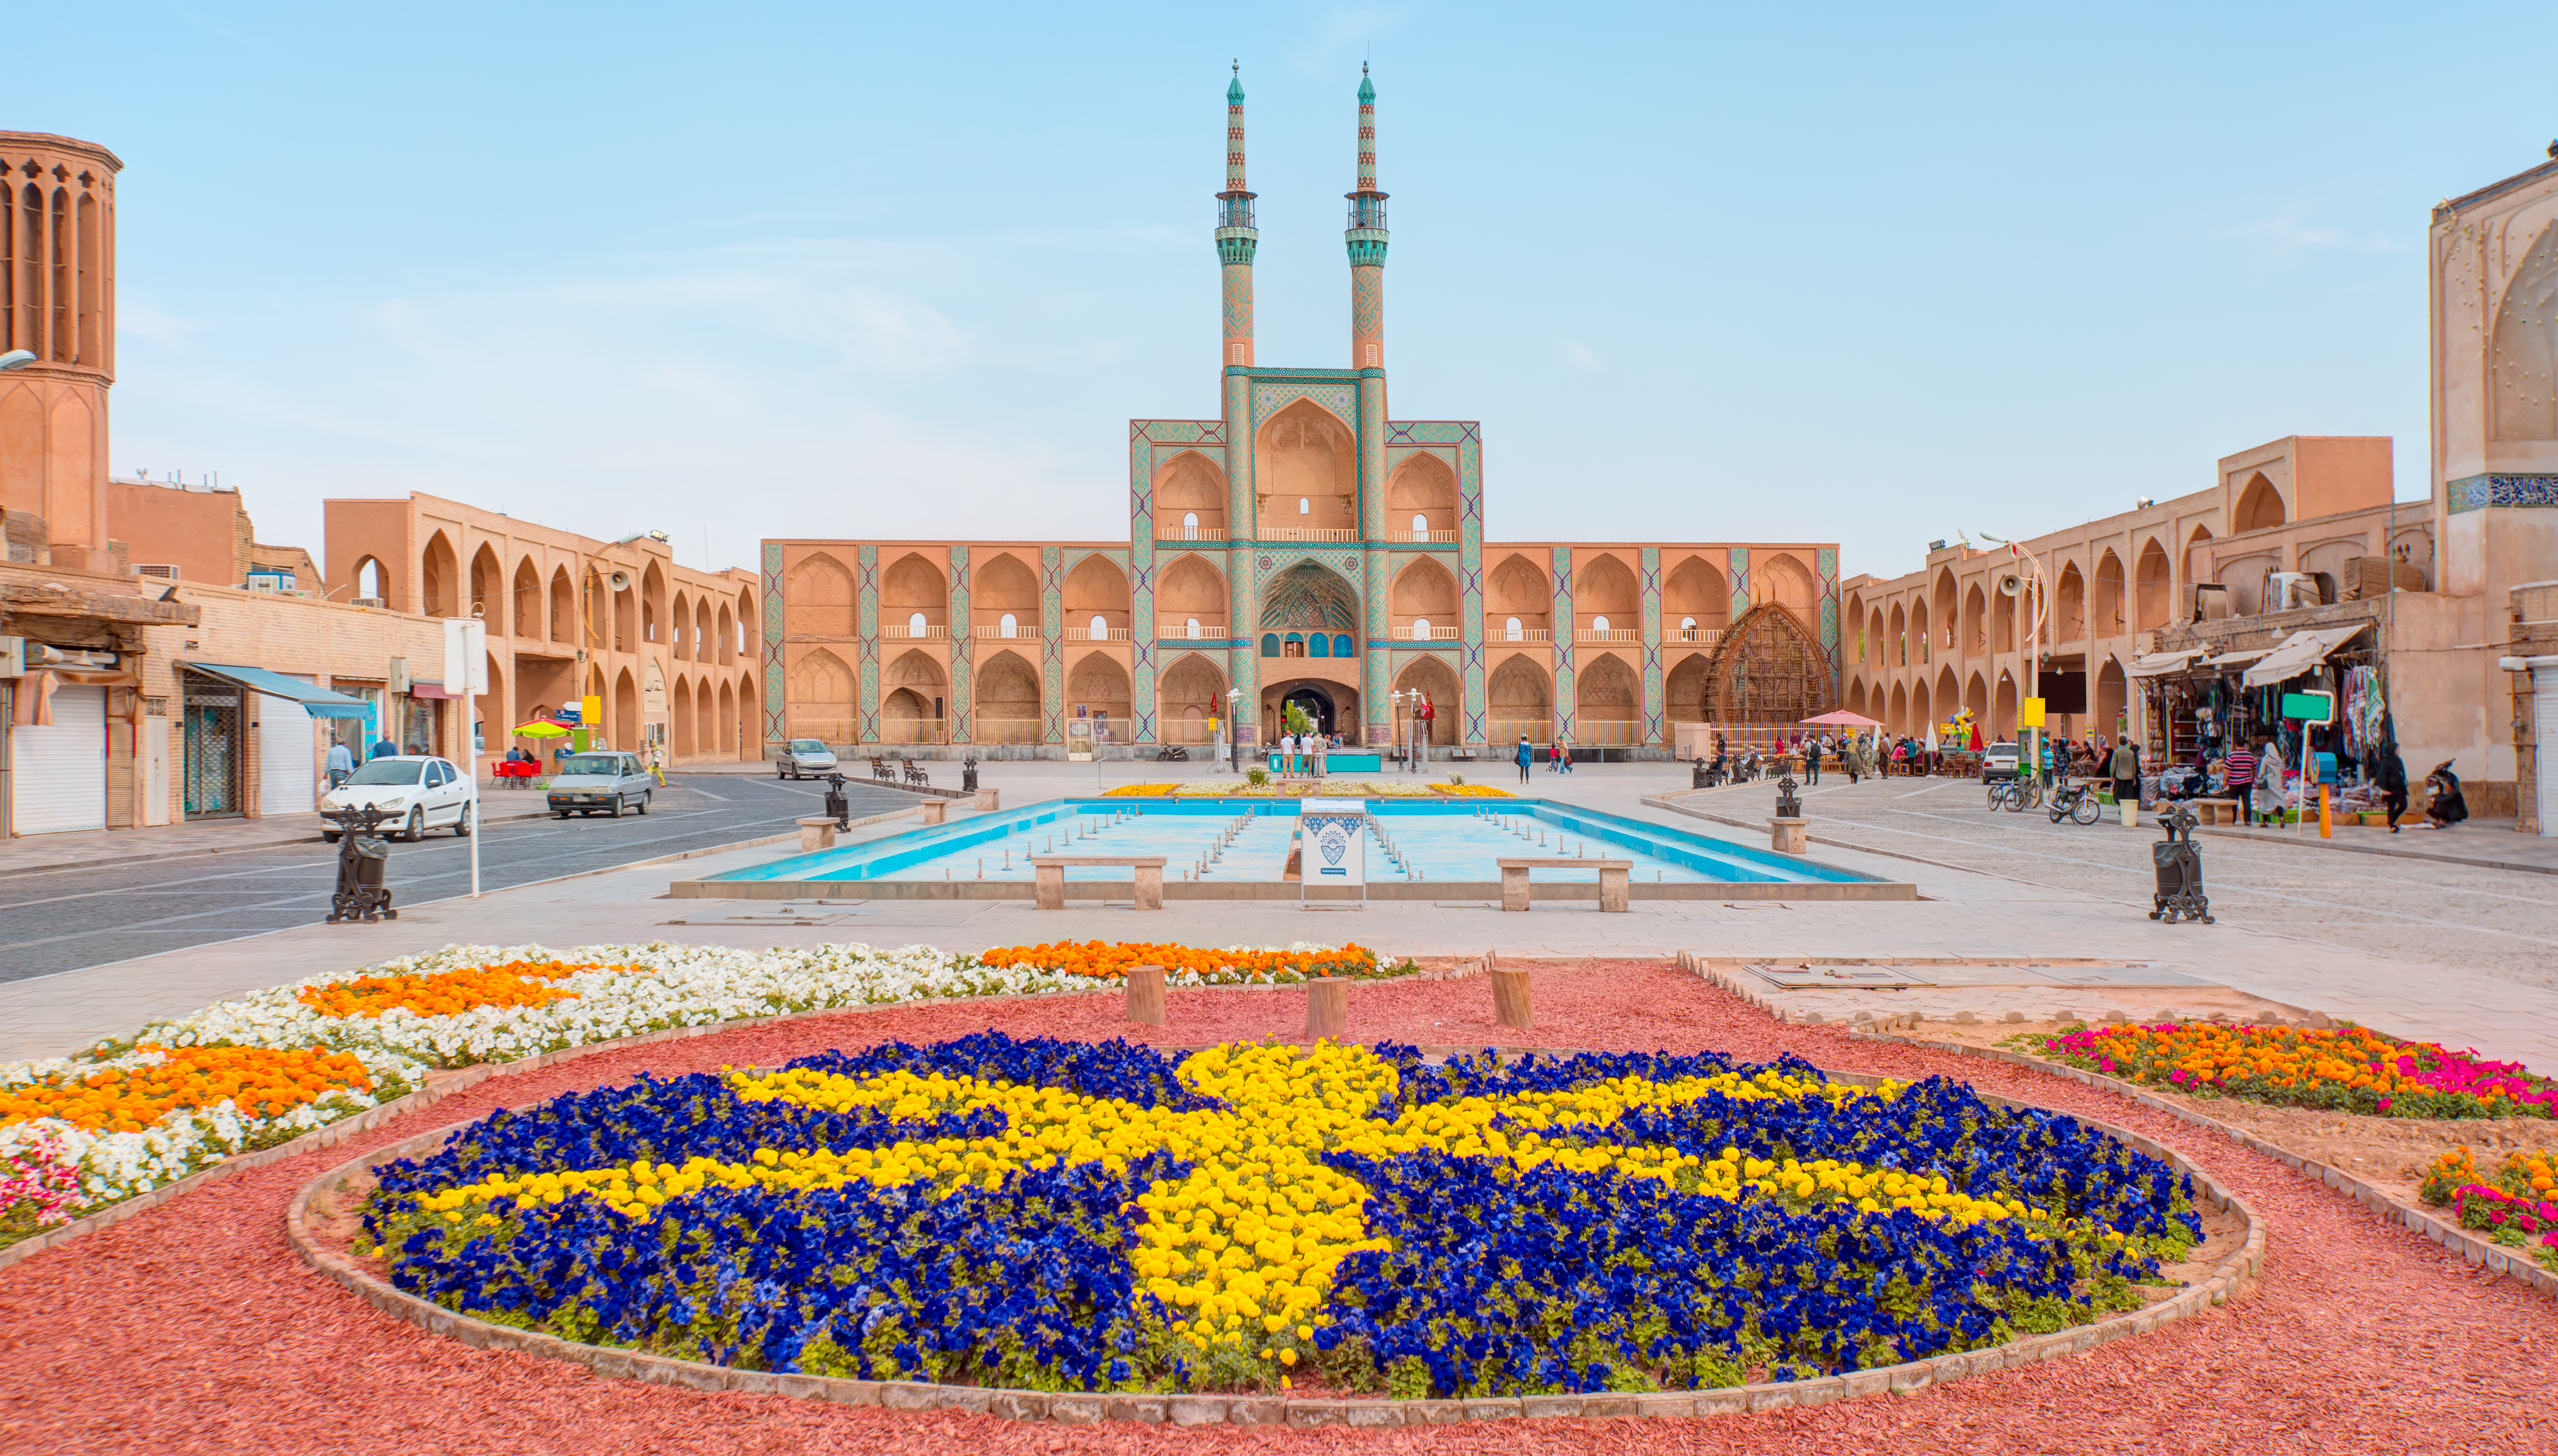 Colourful flowers installation in the square, Amir Chakhmaq Complex. – © muratart / Shutterstock